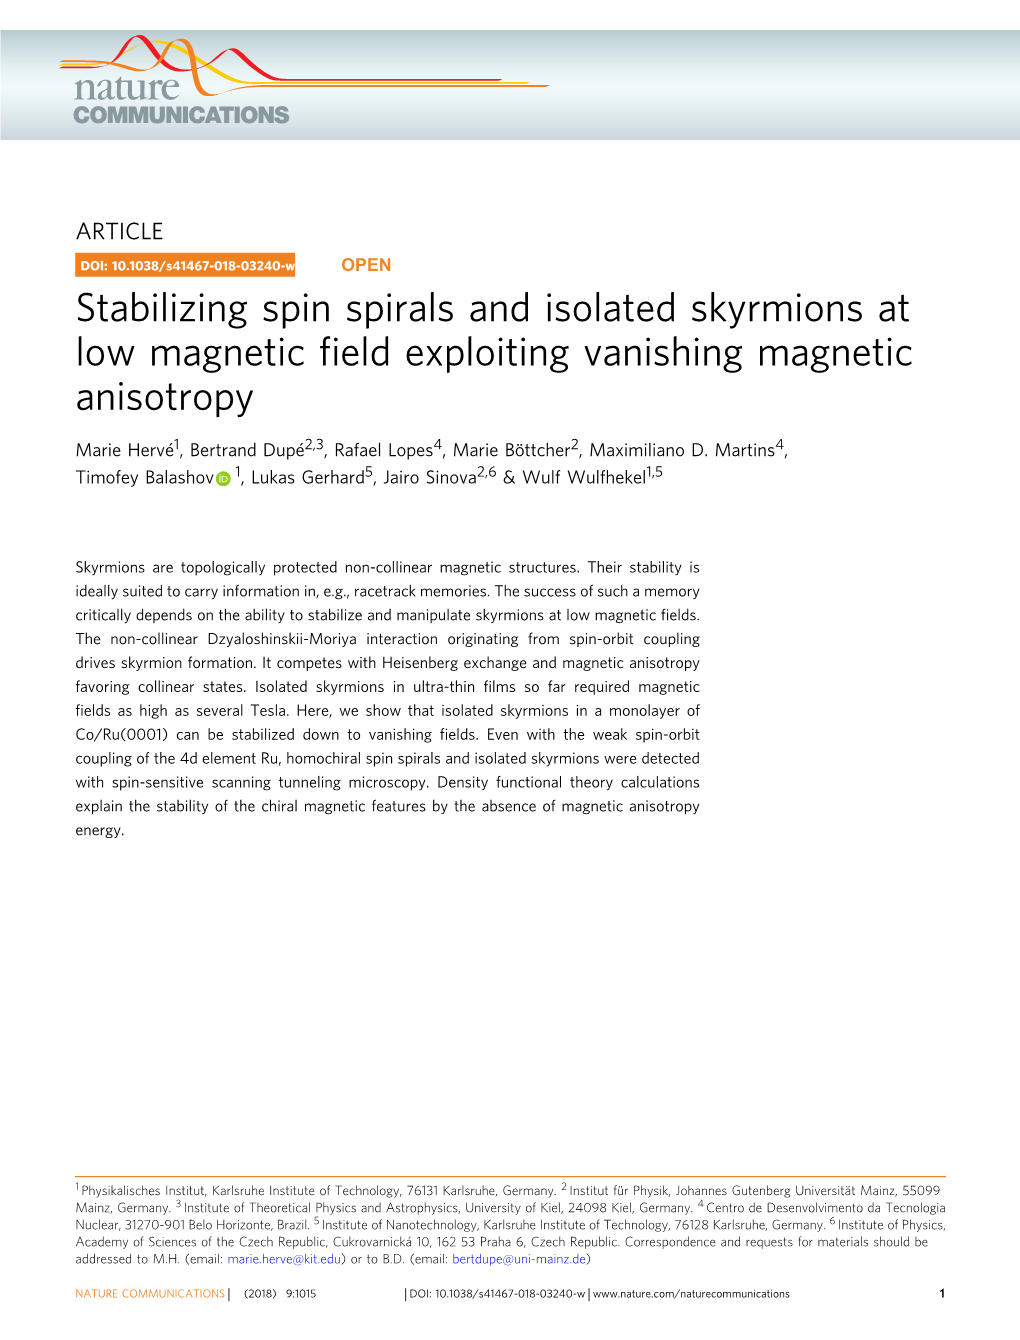 Stabilizing Spin Spirals and Isolated Skyrmions at Low Magnetic Field